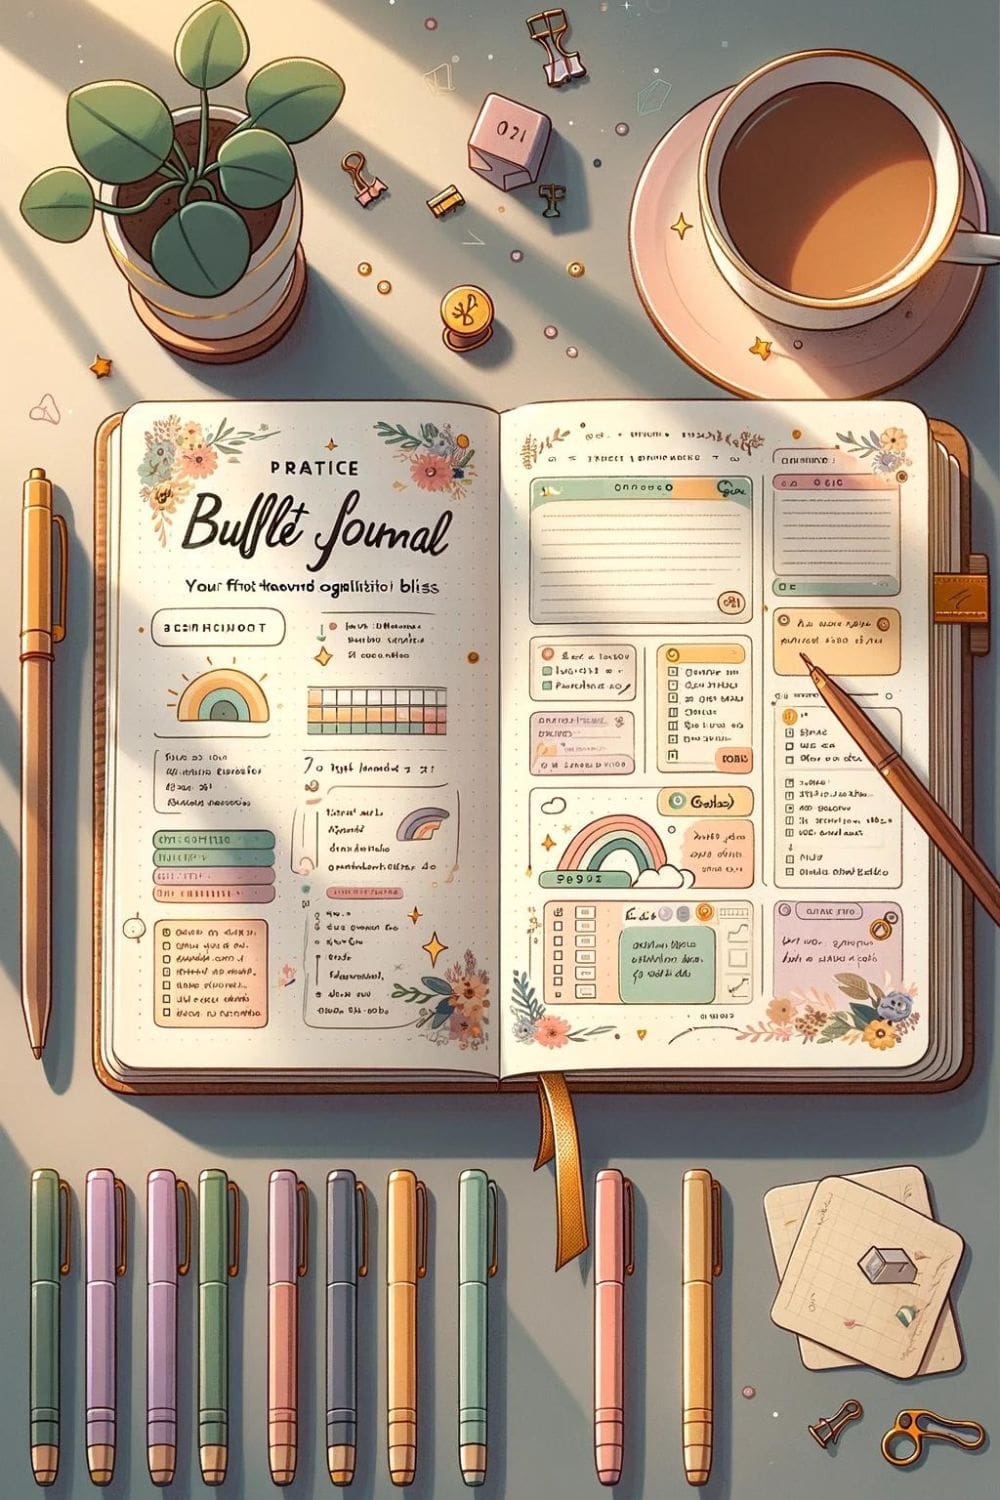 A photo of a bullet journal open on a wooden desk.